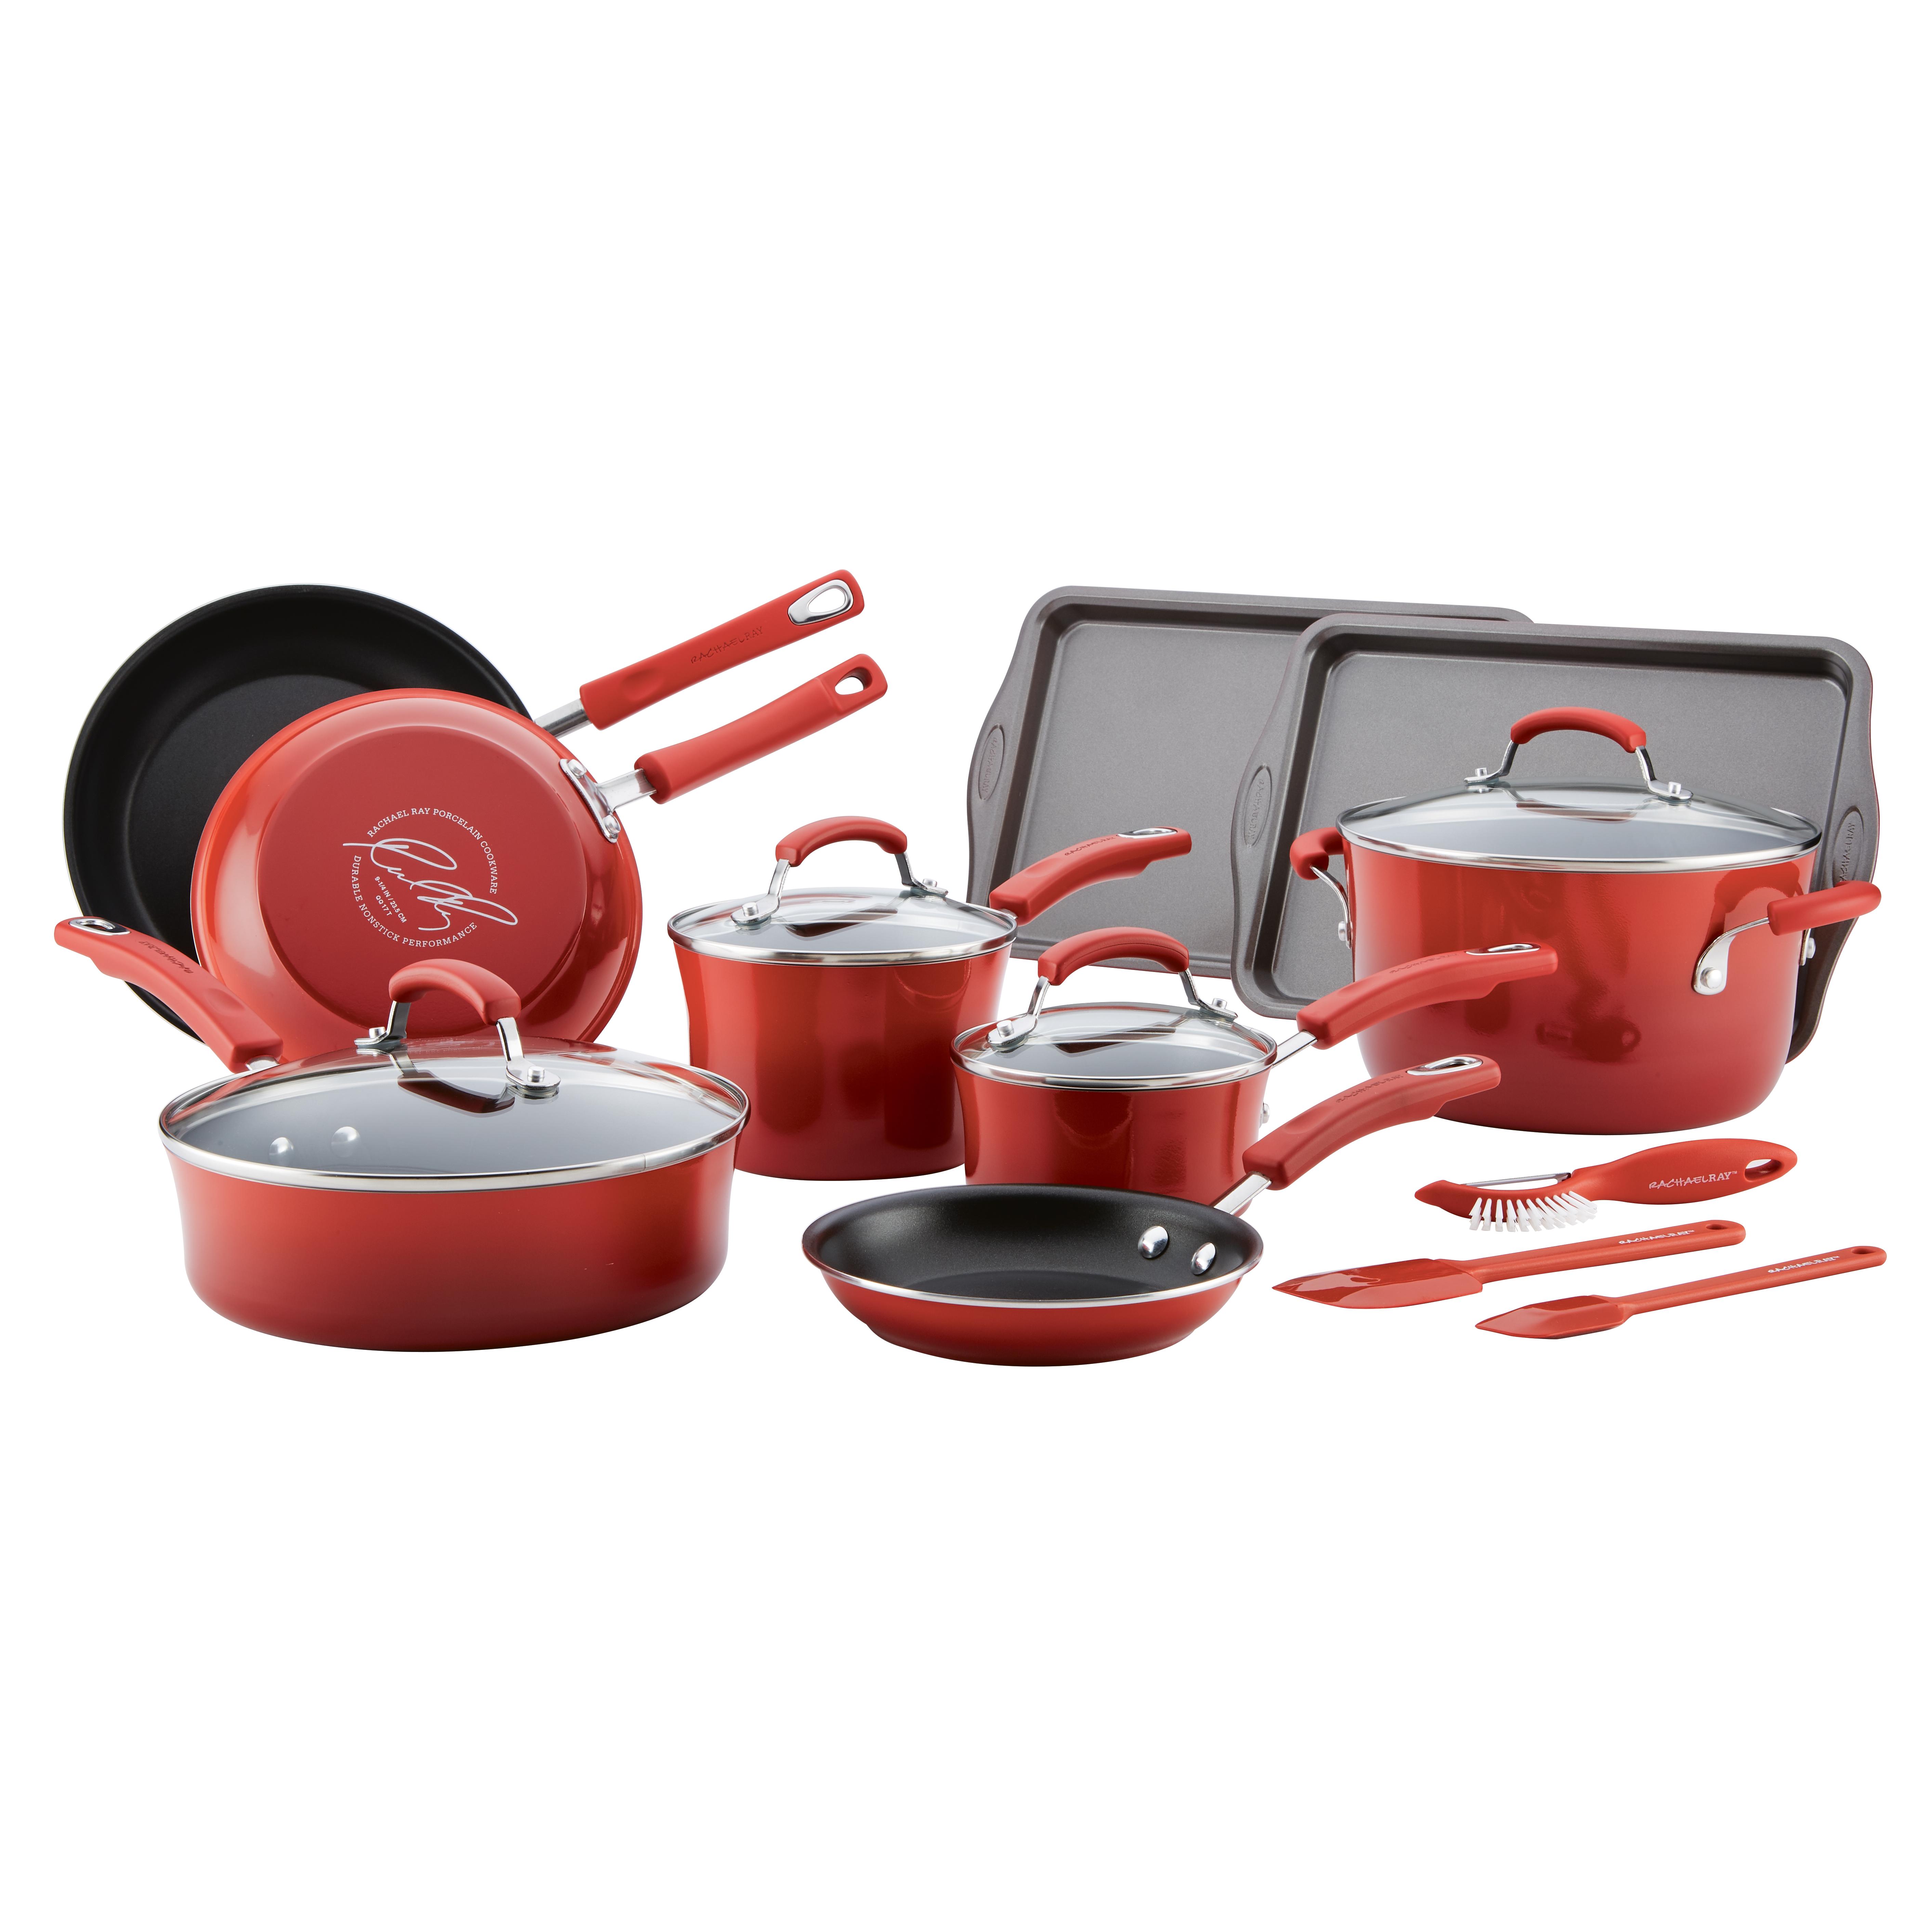 Rachael Ray 16-Piece Classic Brights Porcelain Nonstick Pots and Pans/Cookware Set, Red - image 1 of 6